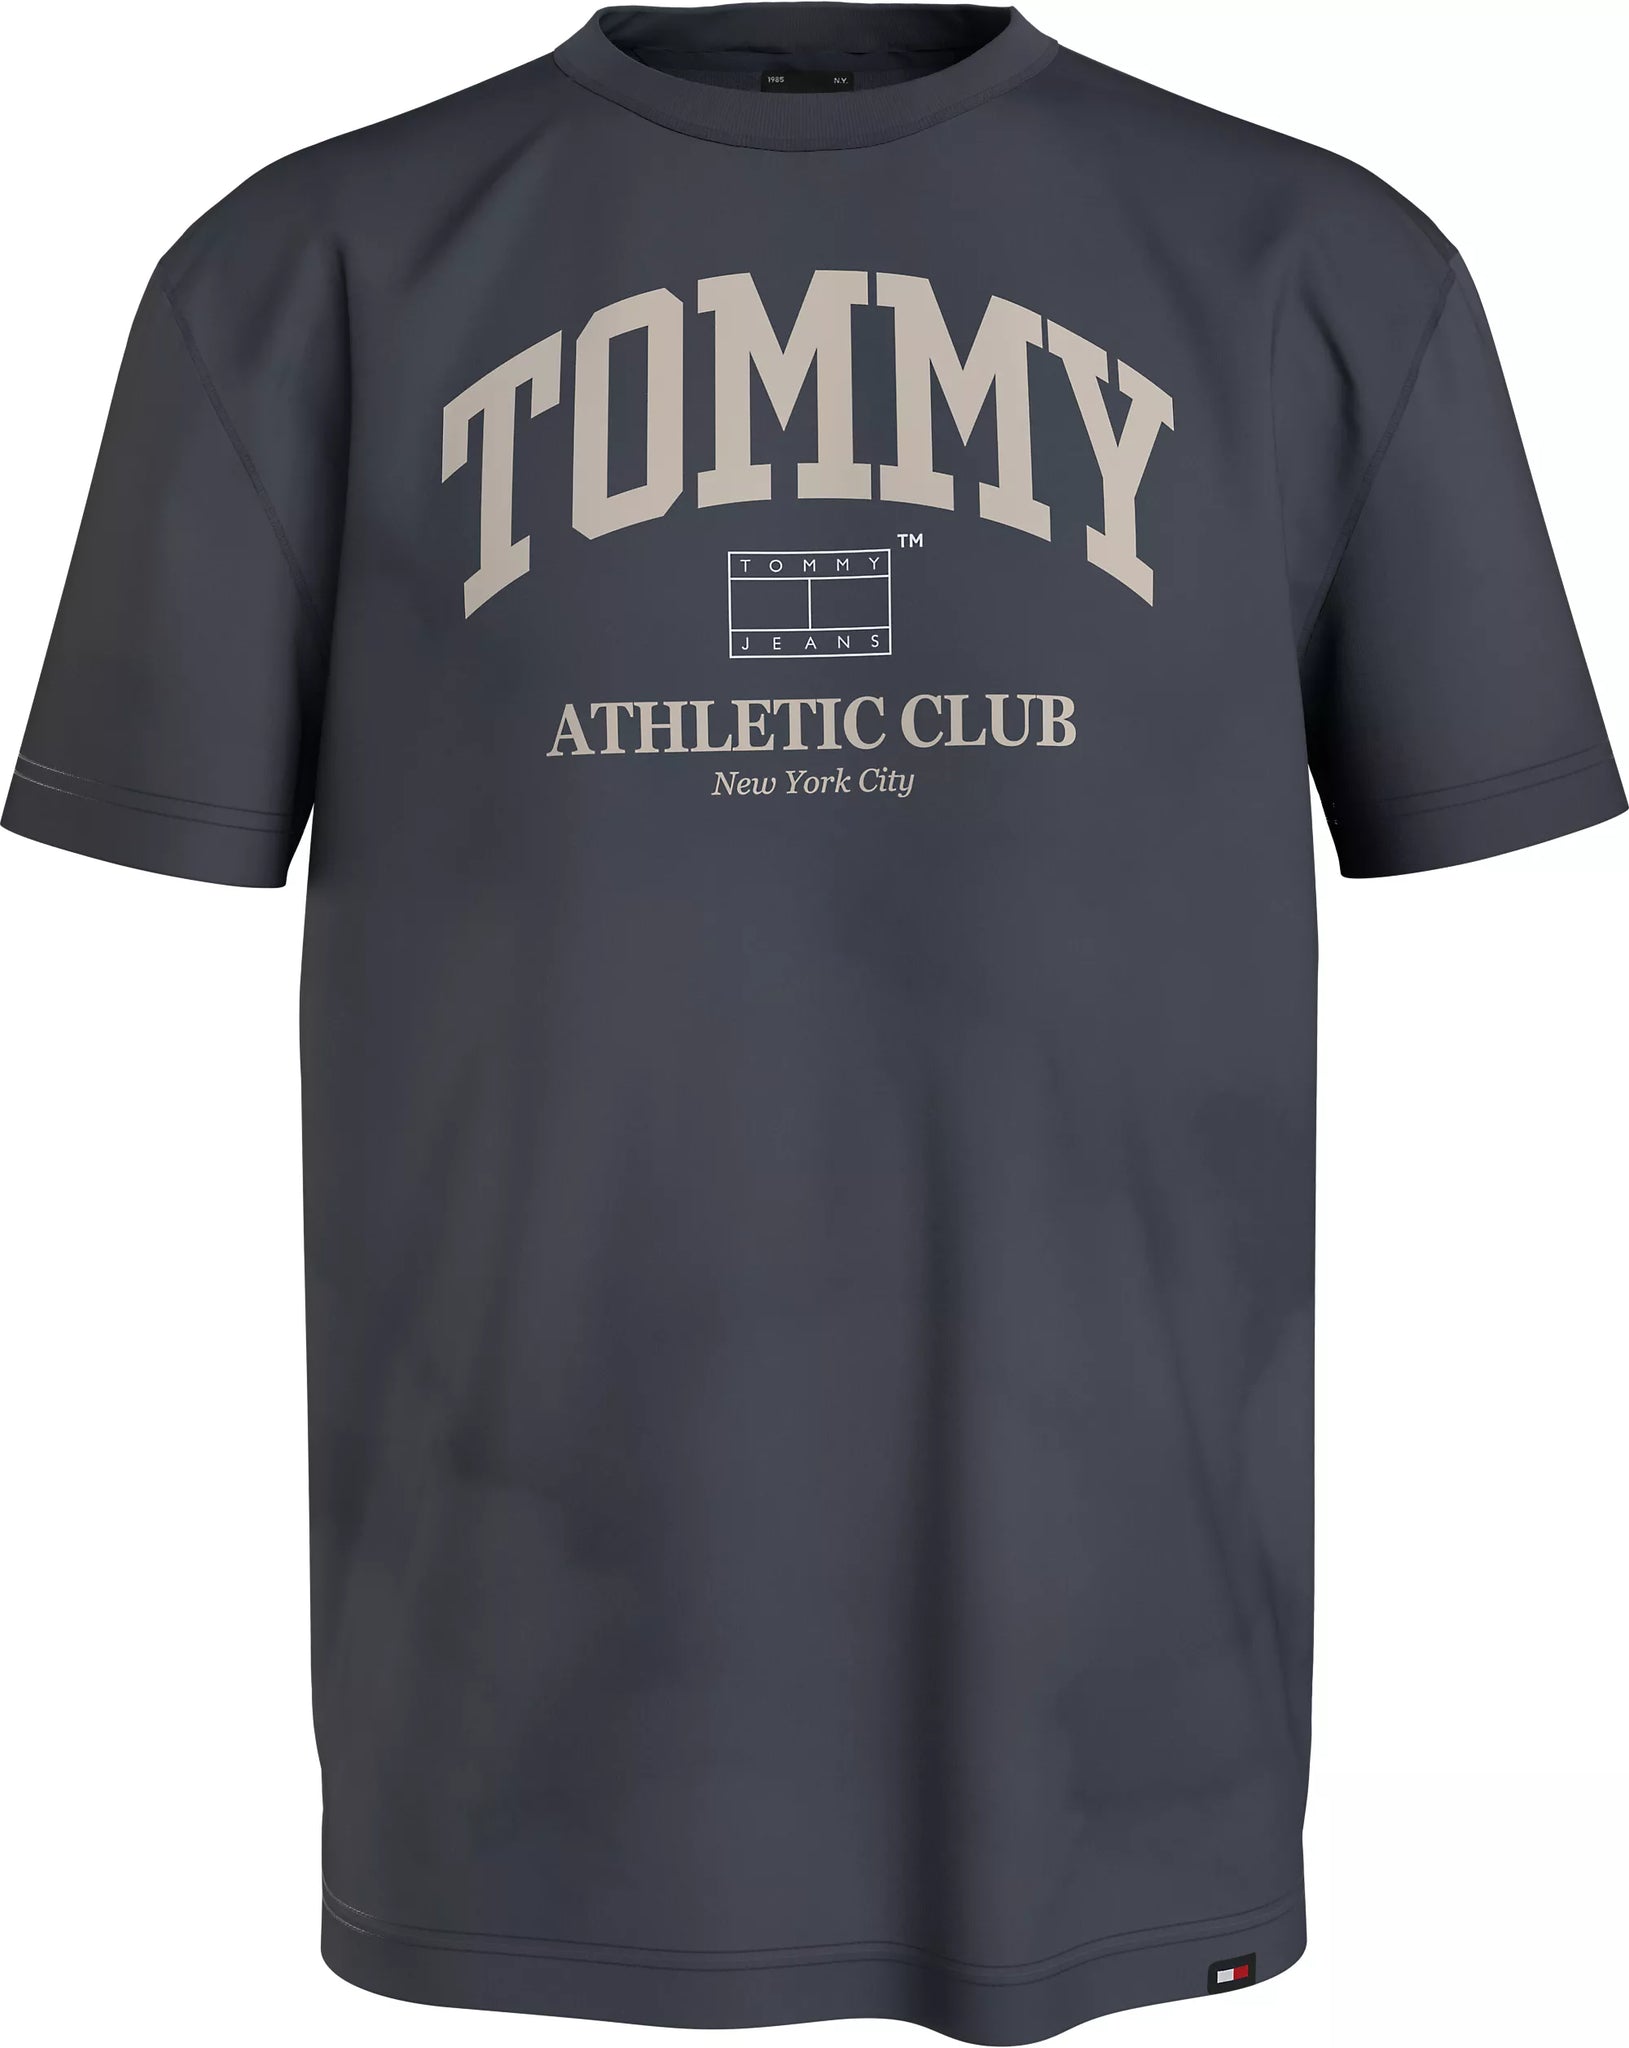 Camiseta Tommy Jeans Athletic Club